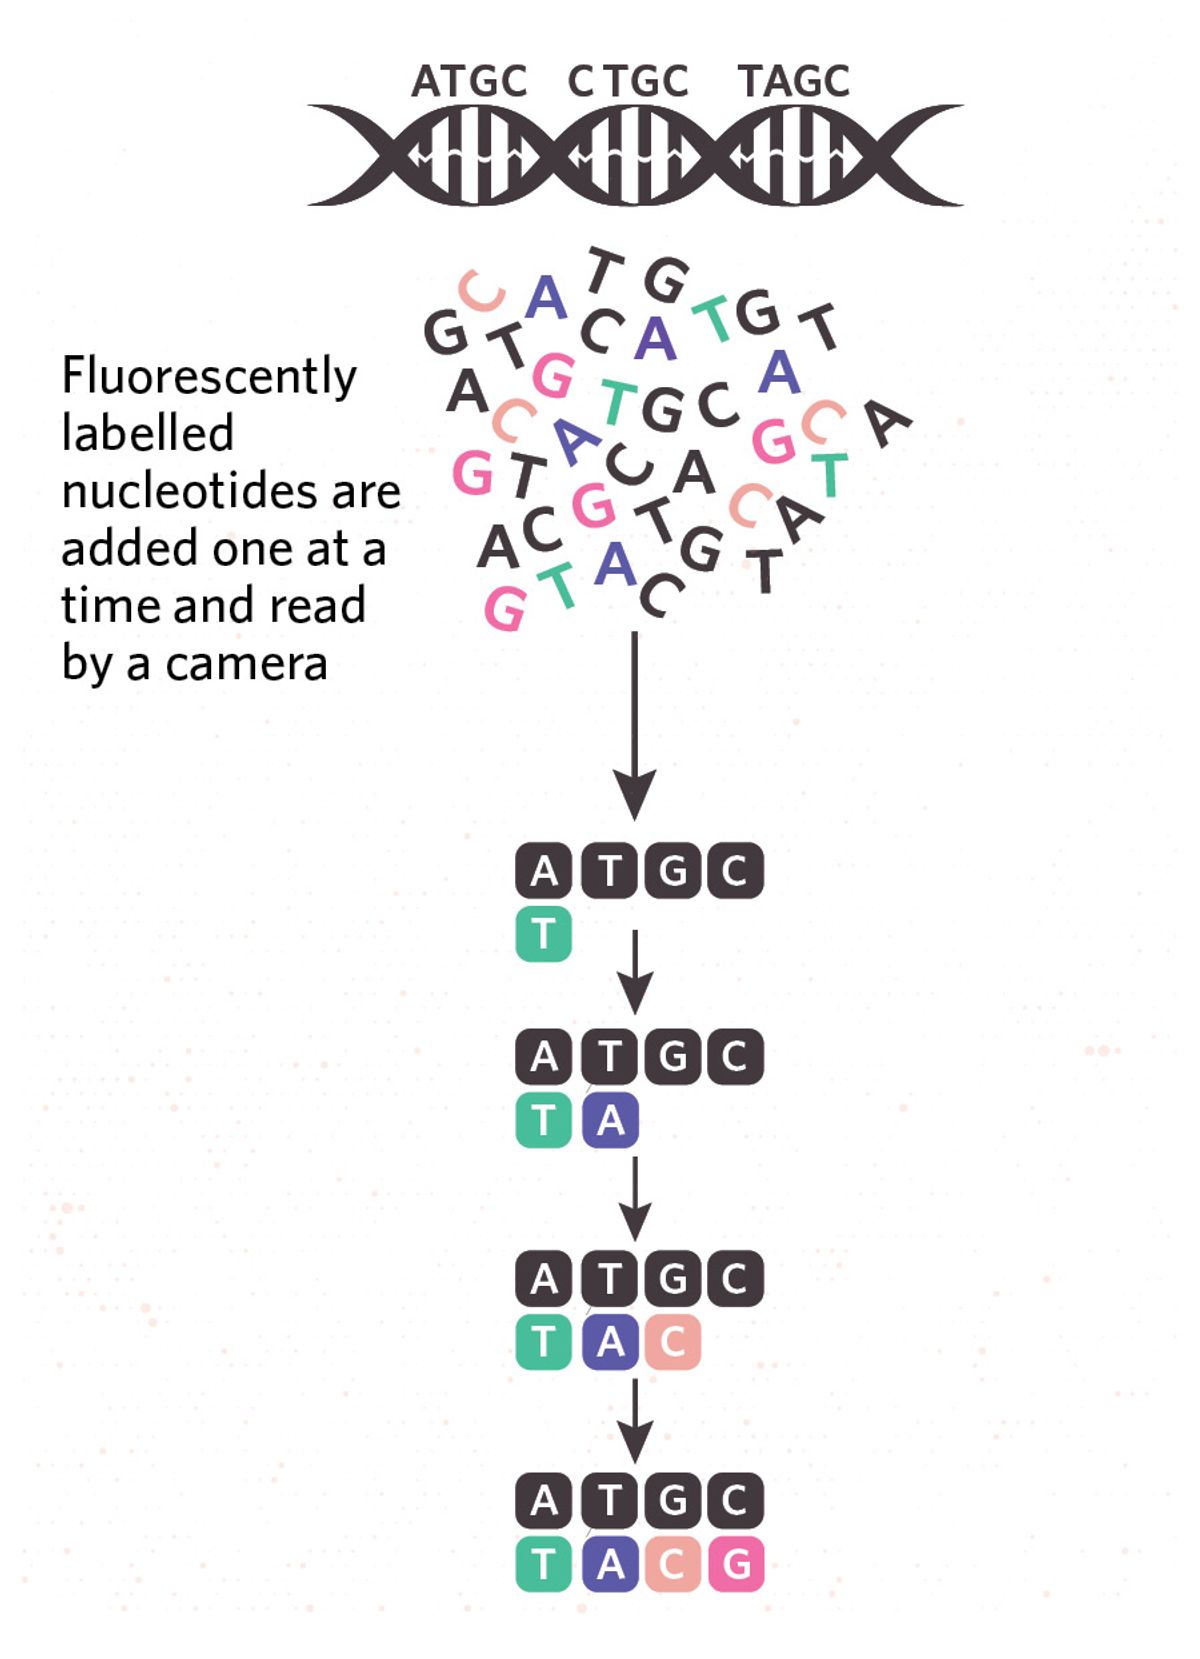 Illustration showing sequencing by synthesis